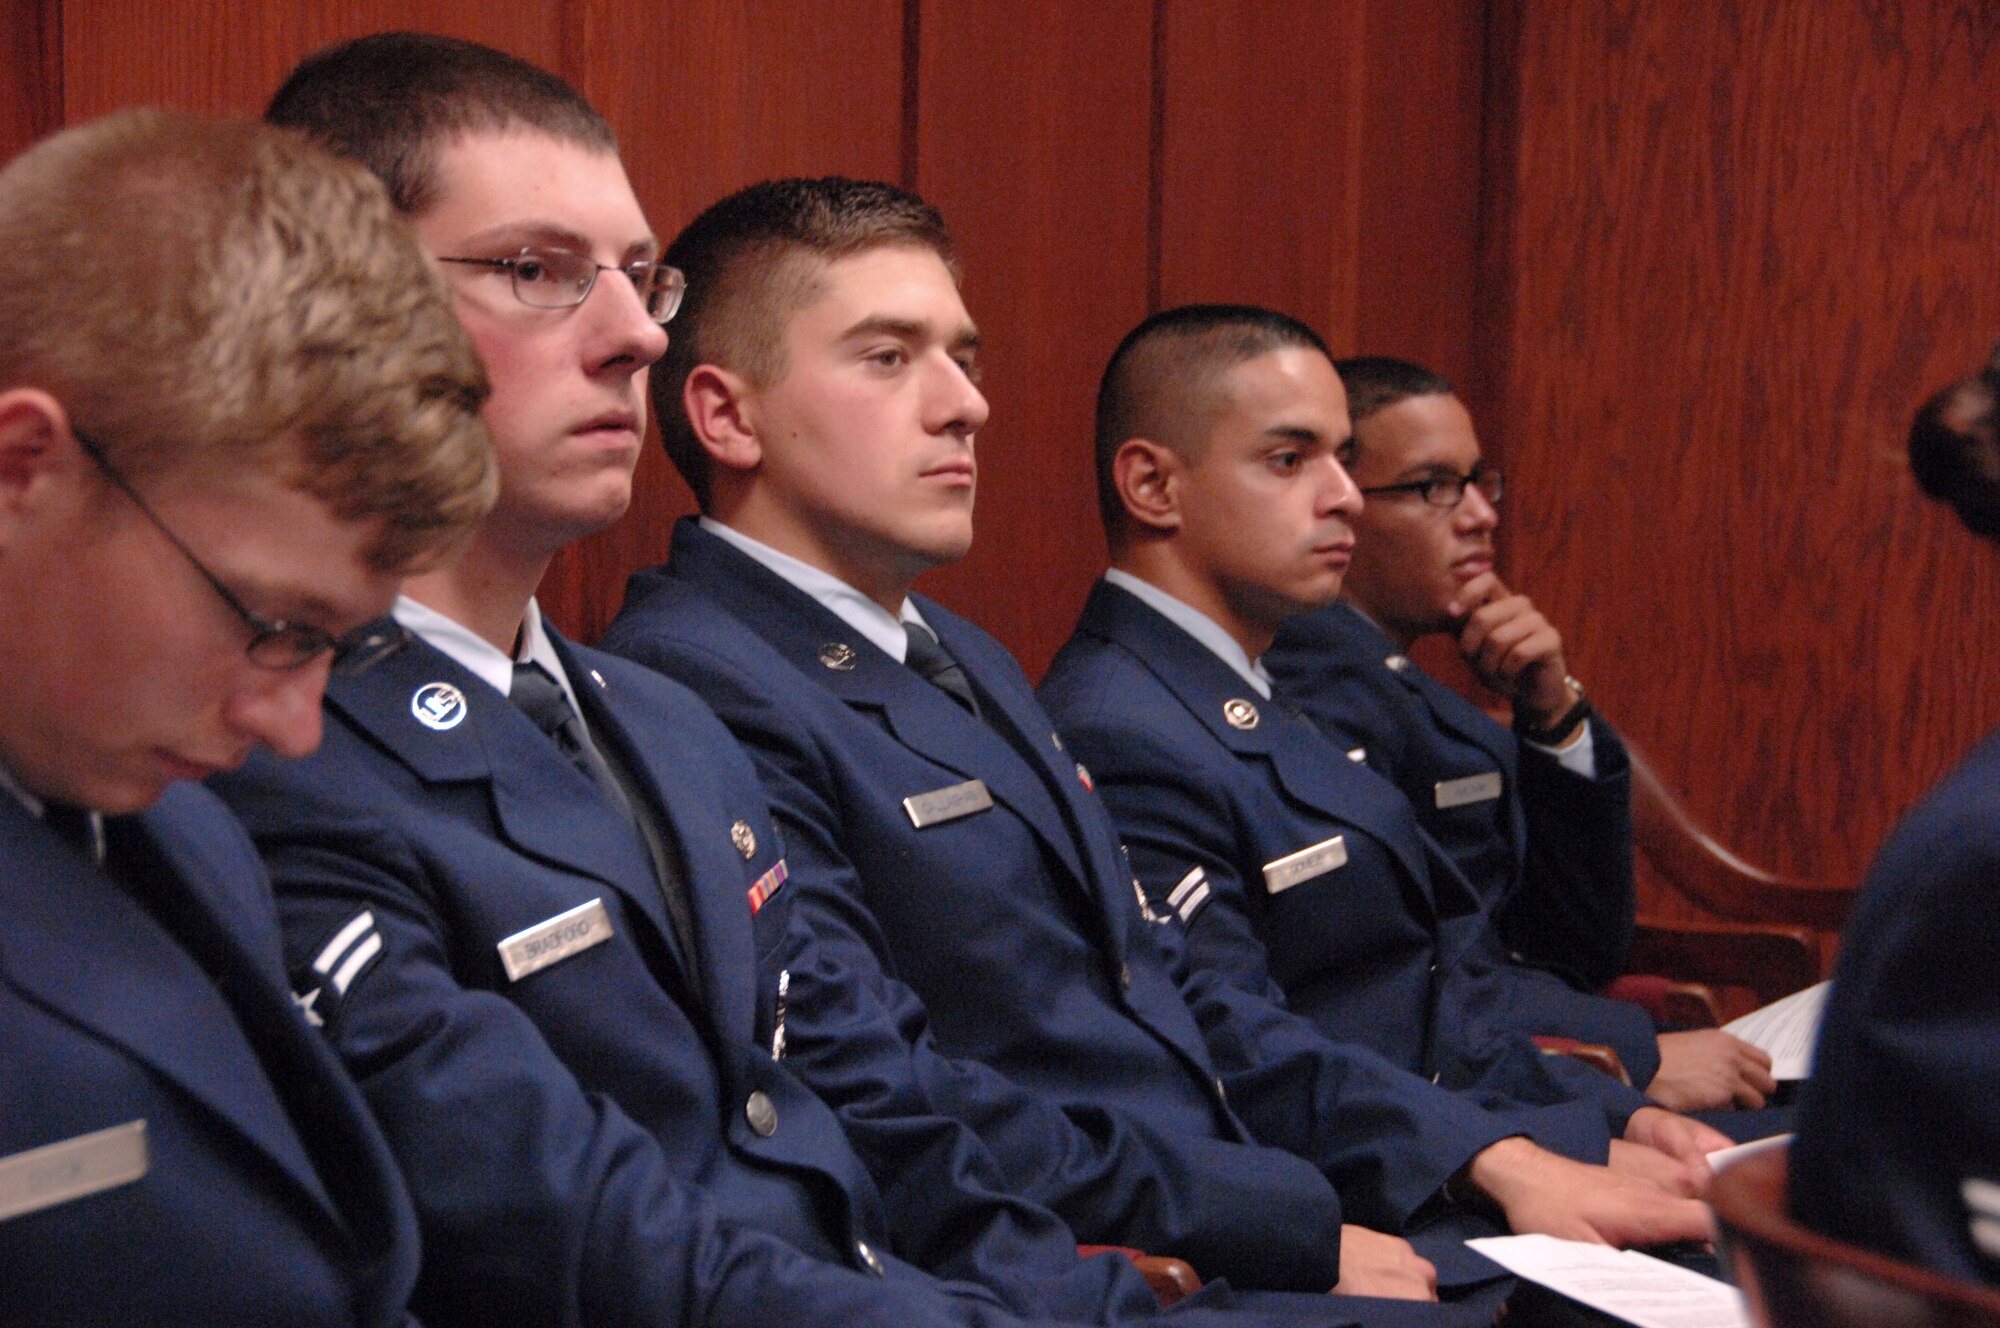 Airmen listen to opening statements during a ‘mock trial’ held June 19 inside the Offutt AFB court room. All Airmen attending the week-long First Term Airmen’s Center orientation course will participate in a mock trial as part of their training. The 55th Wing legal office created the program with the goal of preventing sexual assault through education and awareness.  (U. S. Air Force photo/Delanie Stafford)